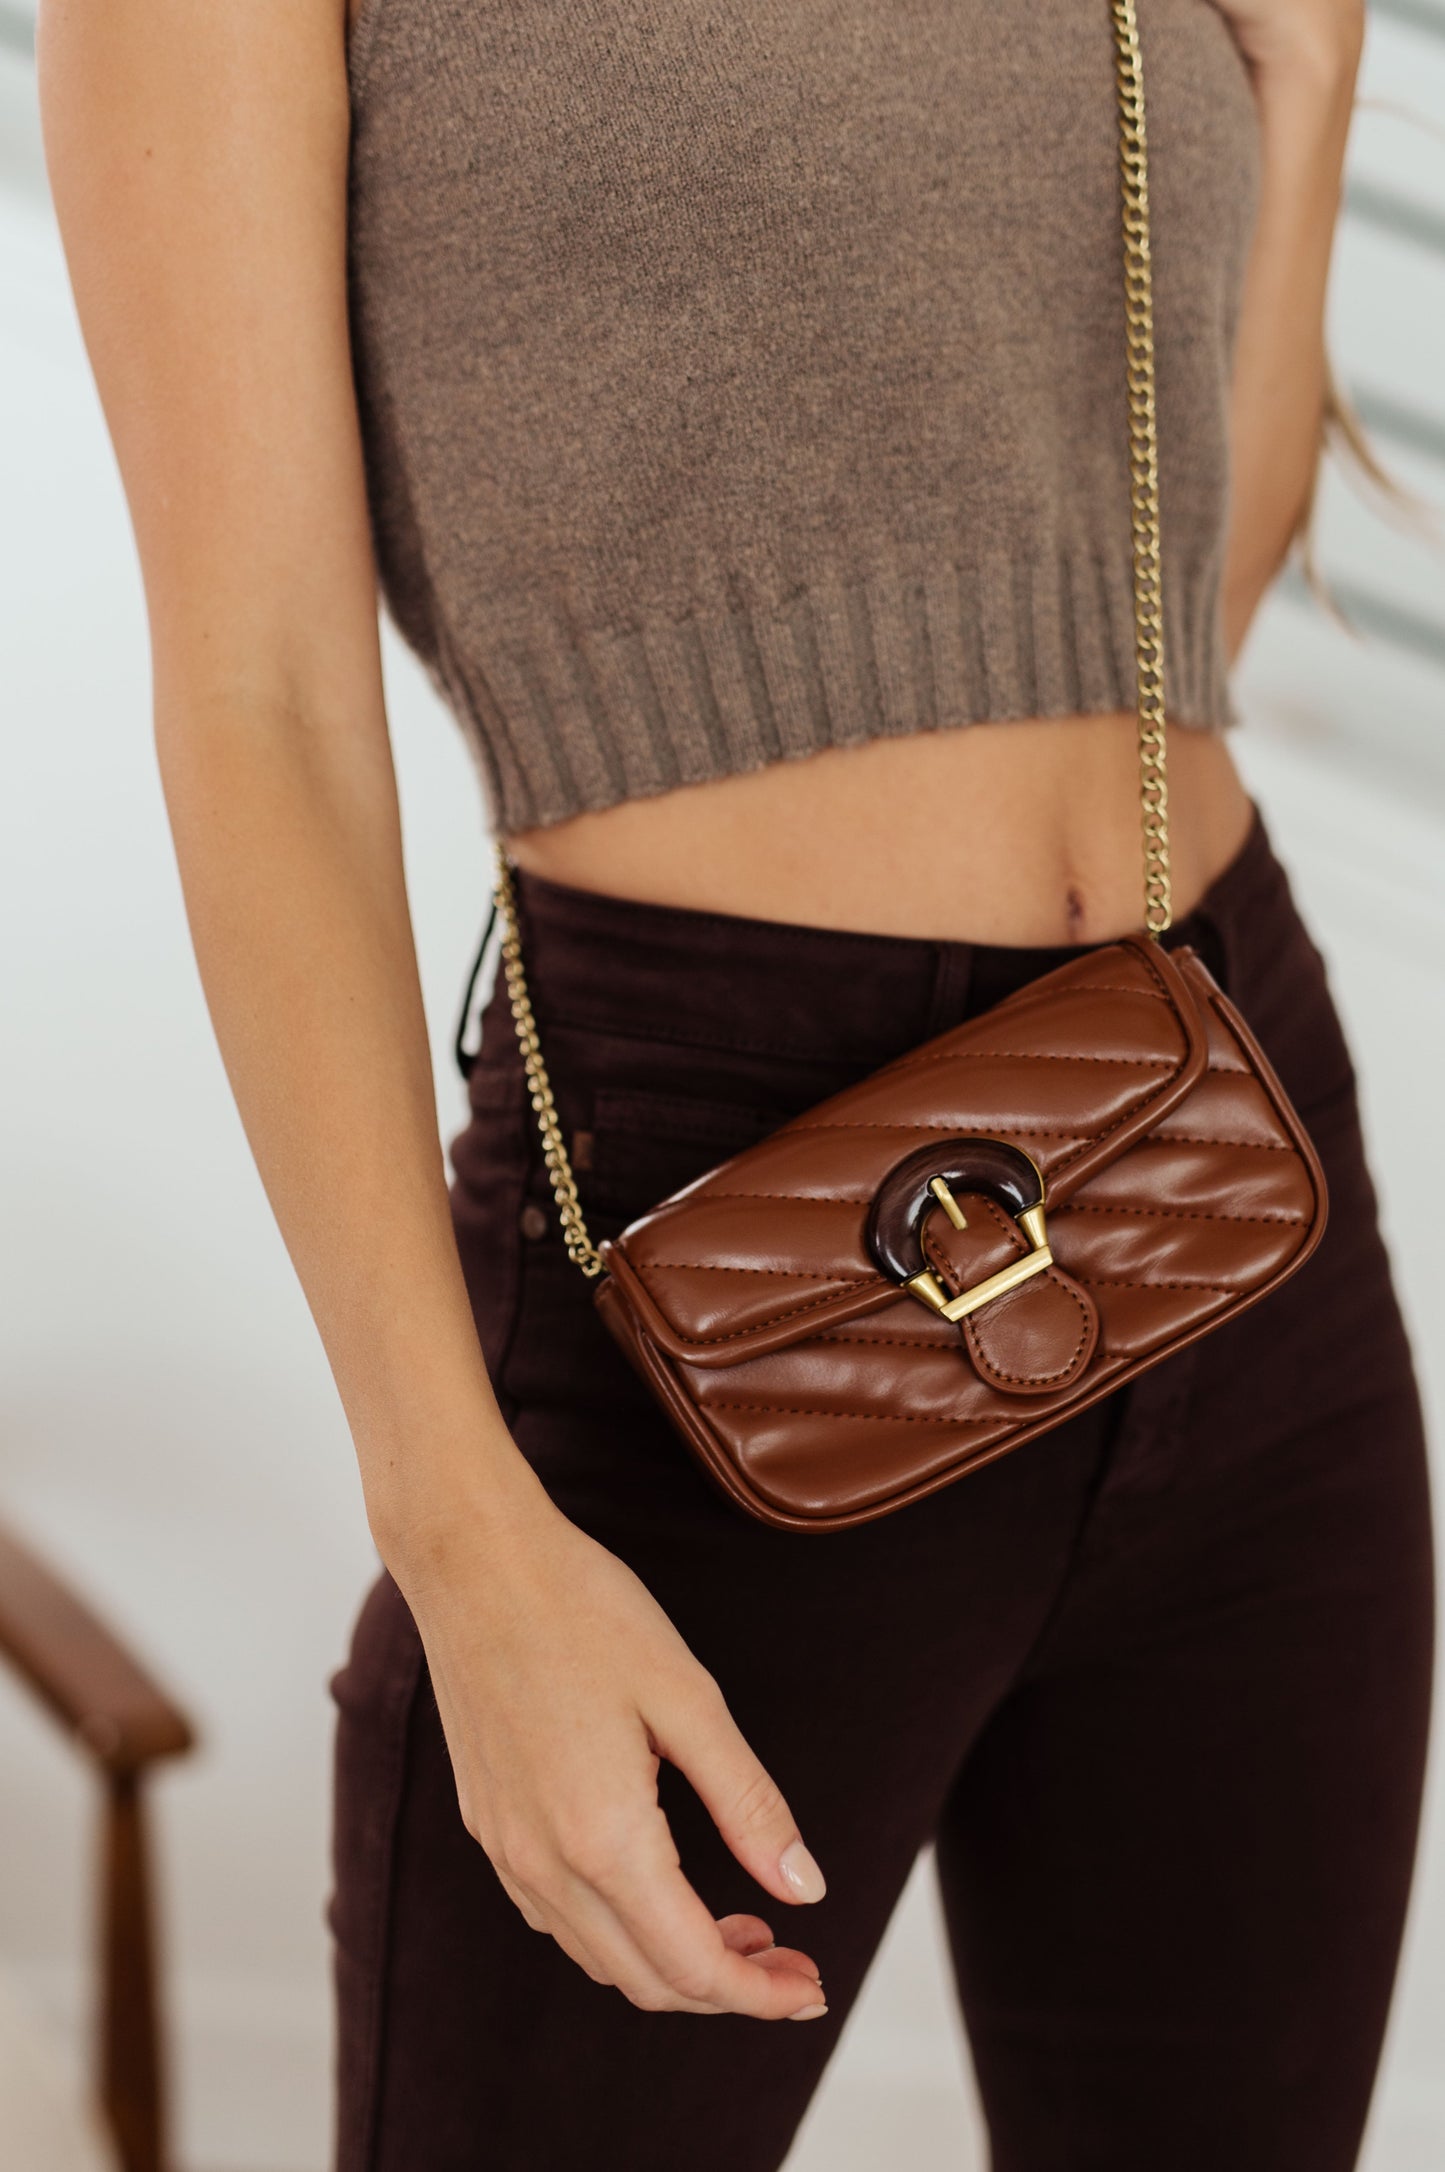 This beautiful Classic Beauty Quilted Clutch is timelessly chic in brown. With its quilted design, decorative wood buckle, magnetic clasp closure, and chain strap, it's the perfect accessory for any elegant event. Upgrade your look with this classic clutch!